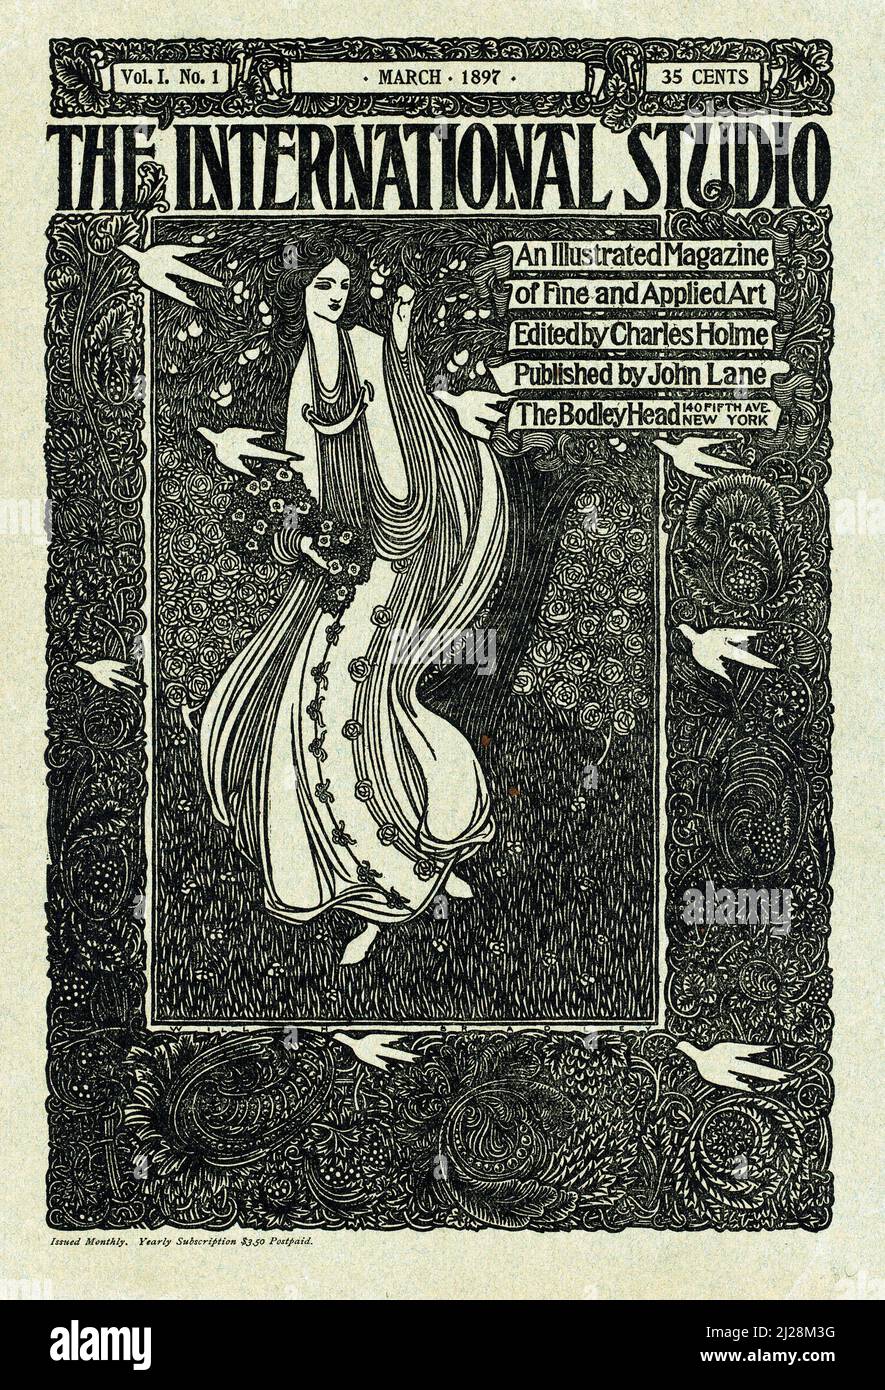 Will Bradley artwork - The international studio, March 1897 (1897) American Art Nouveau, black and white poster - Old and vintage poster Stock Photo